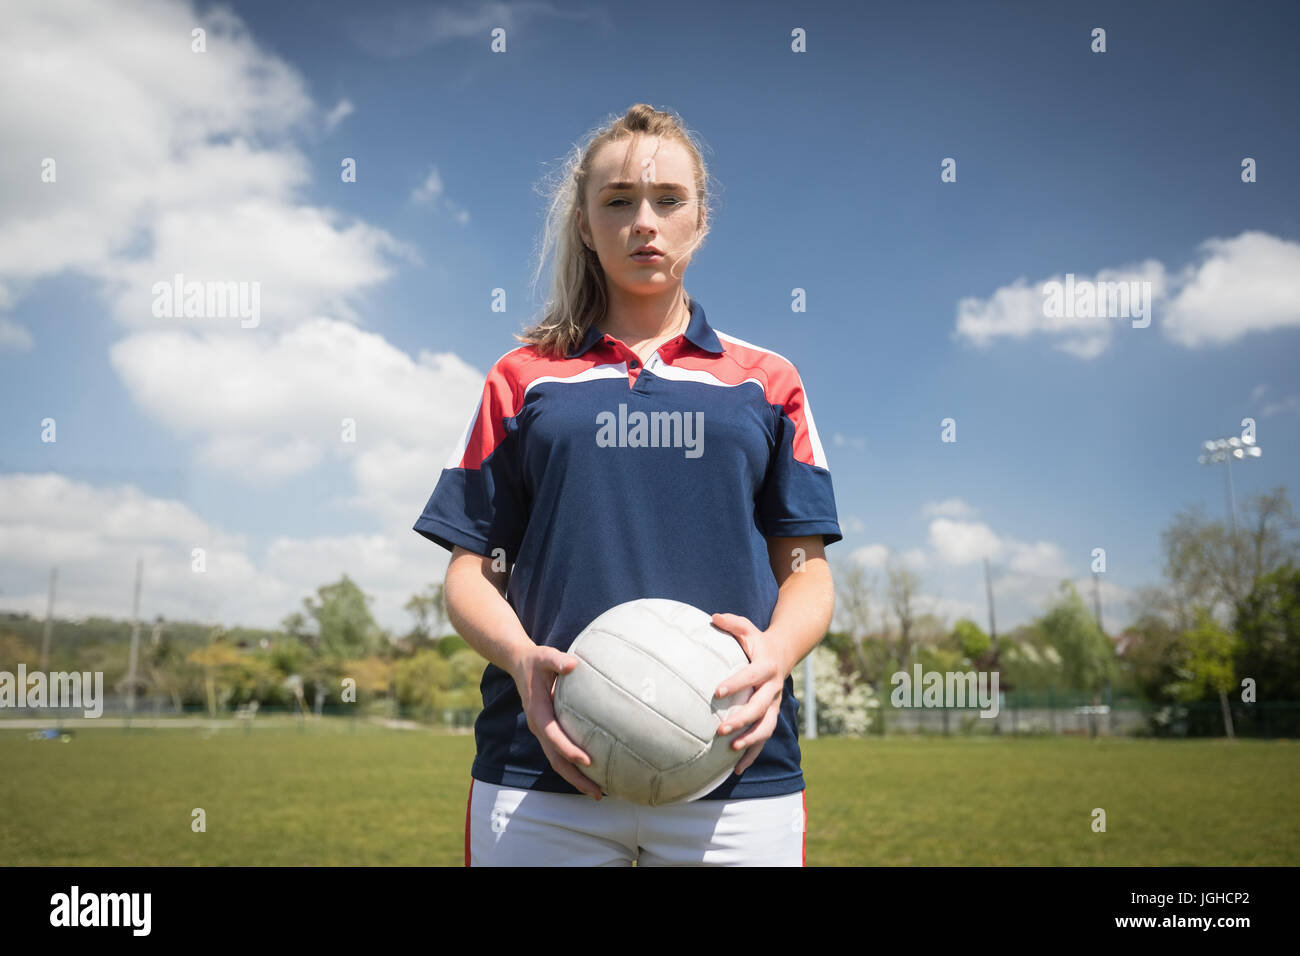 Portrait of female player holding soccer ball on field against sky Banque D'Images